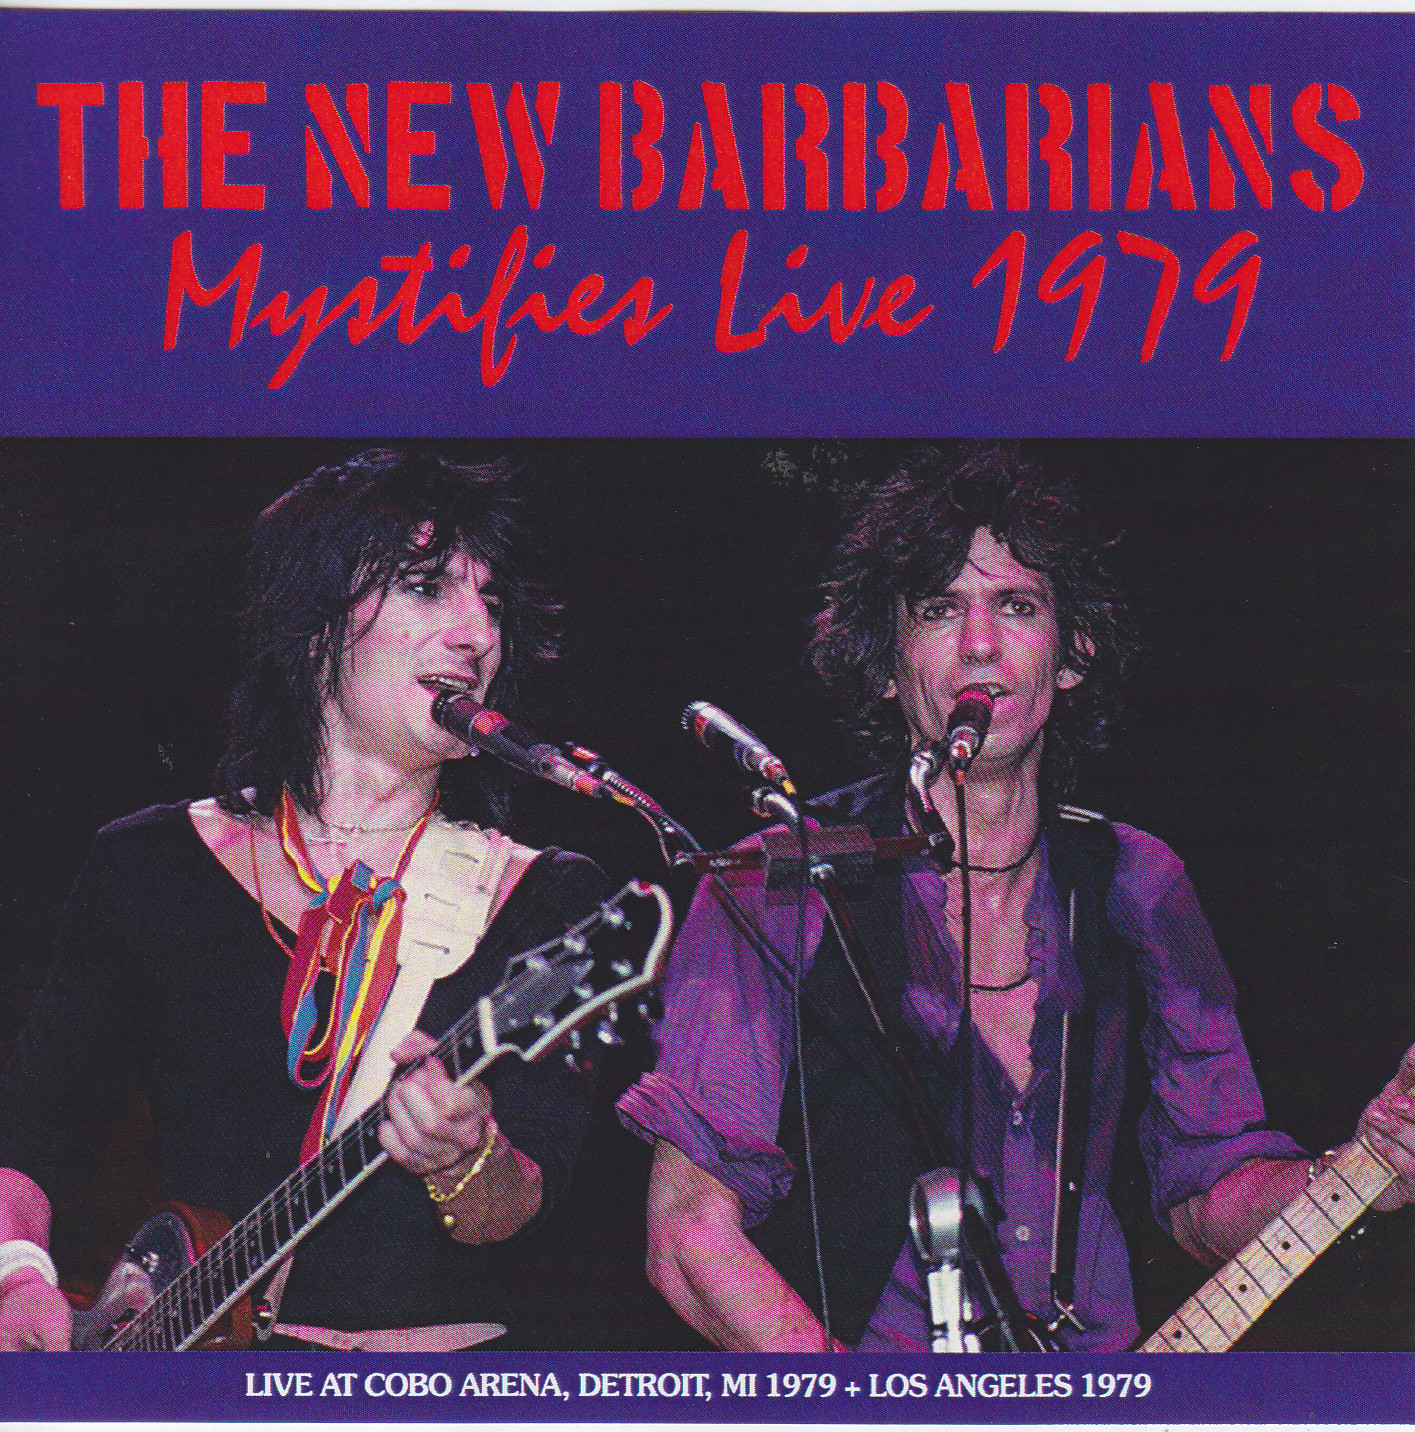 New Barbarians / Mystified Live 1979 / 2CDR – GiGinJapan